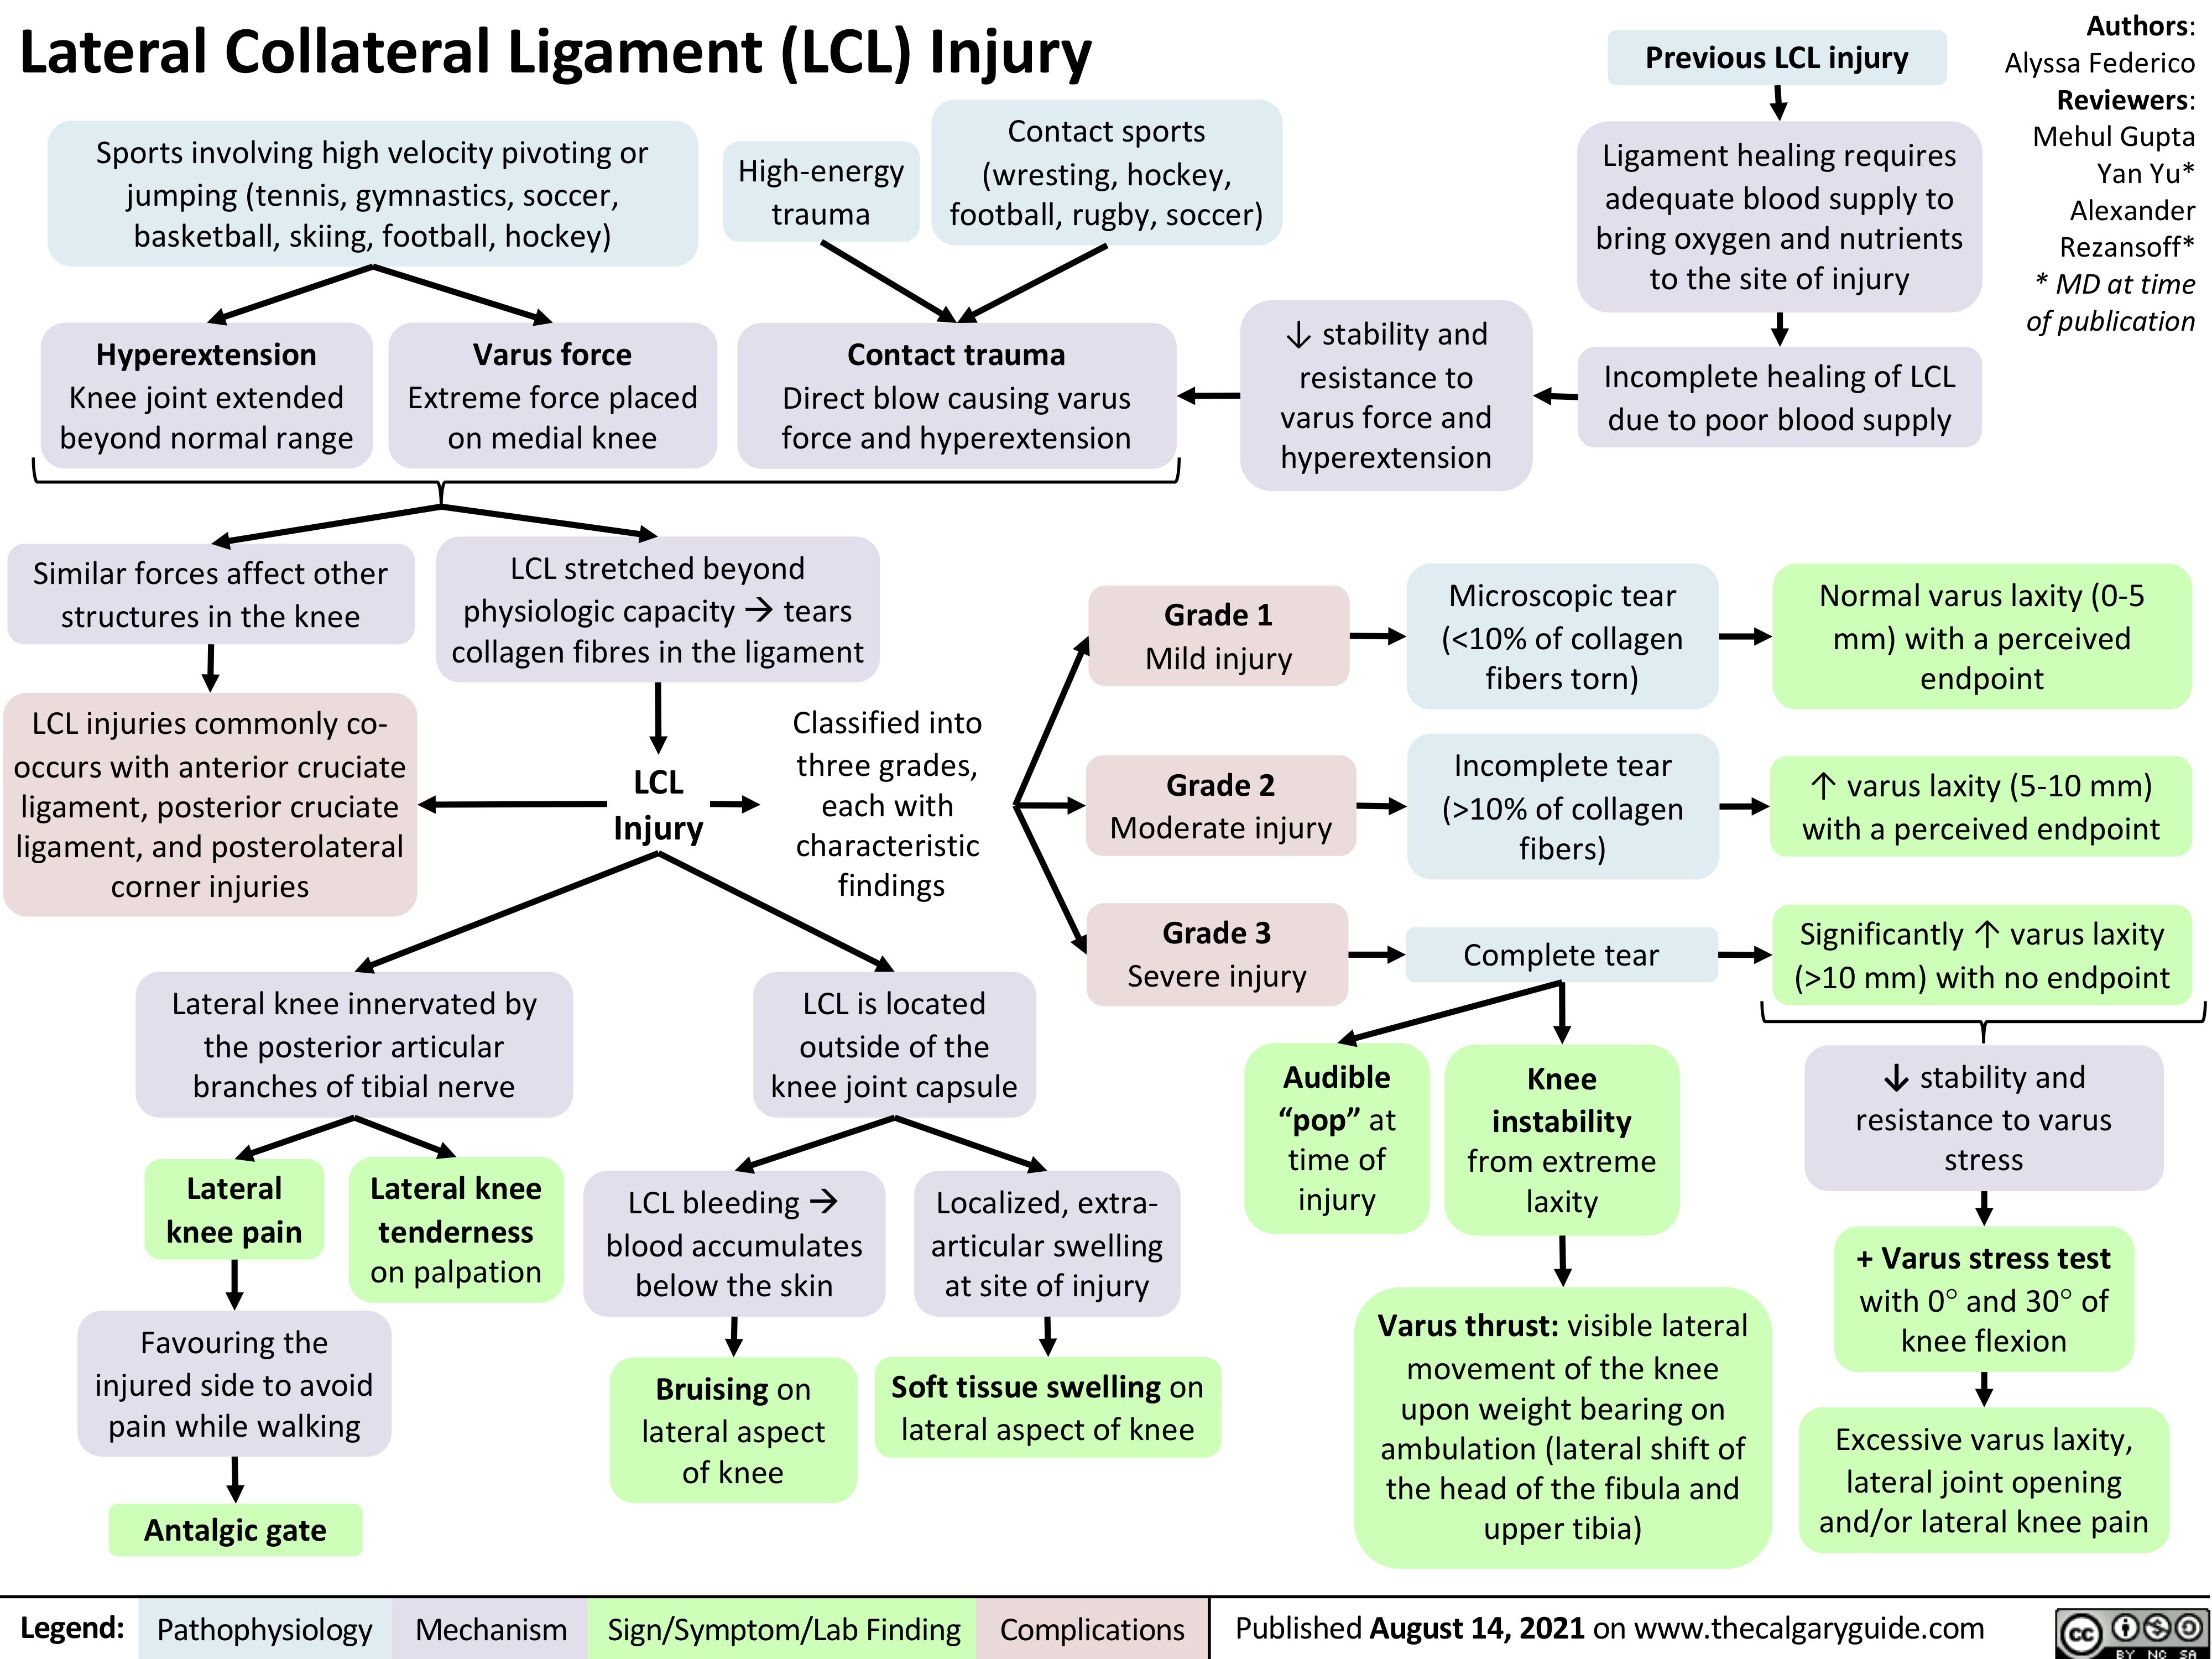 Lateral Collateral Ligament Injury (LCL) - Atlantic Orthopaedic